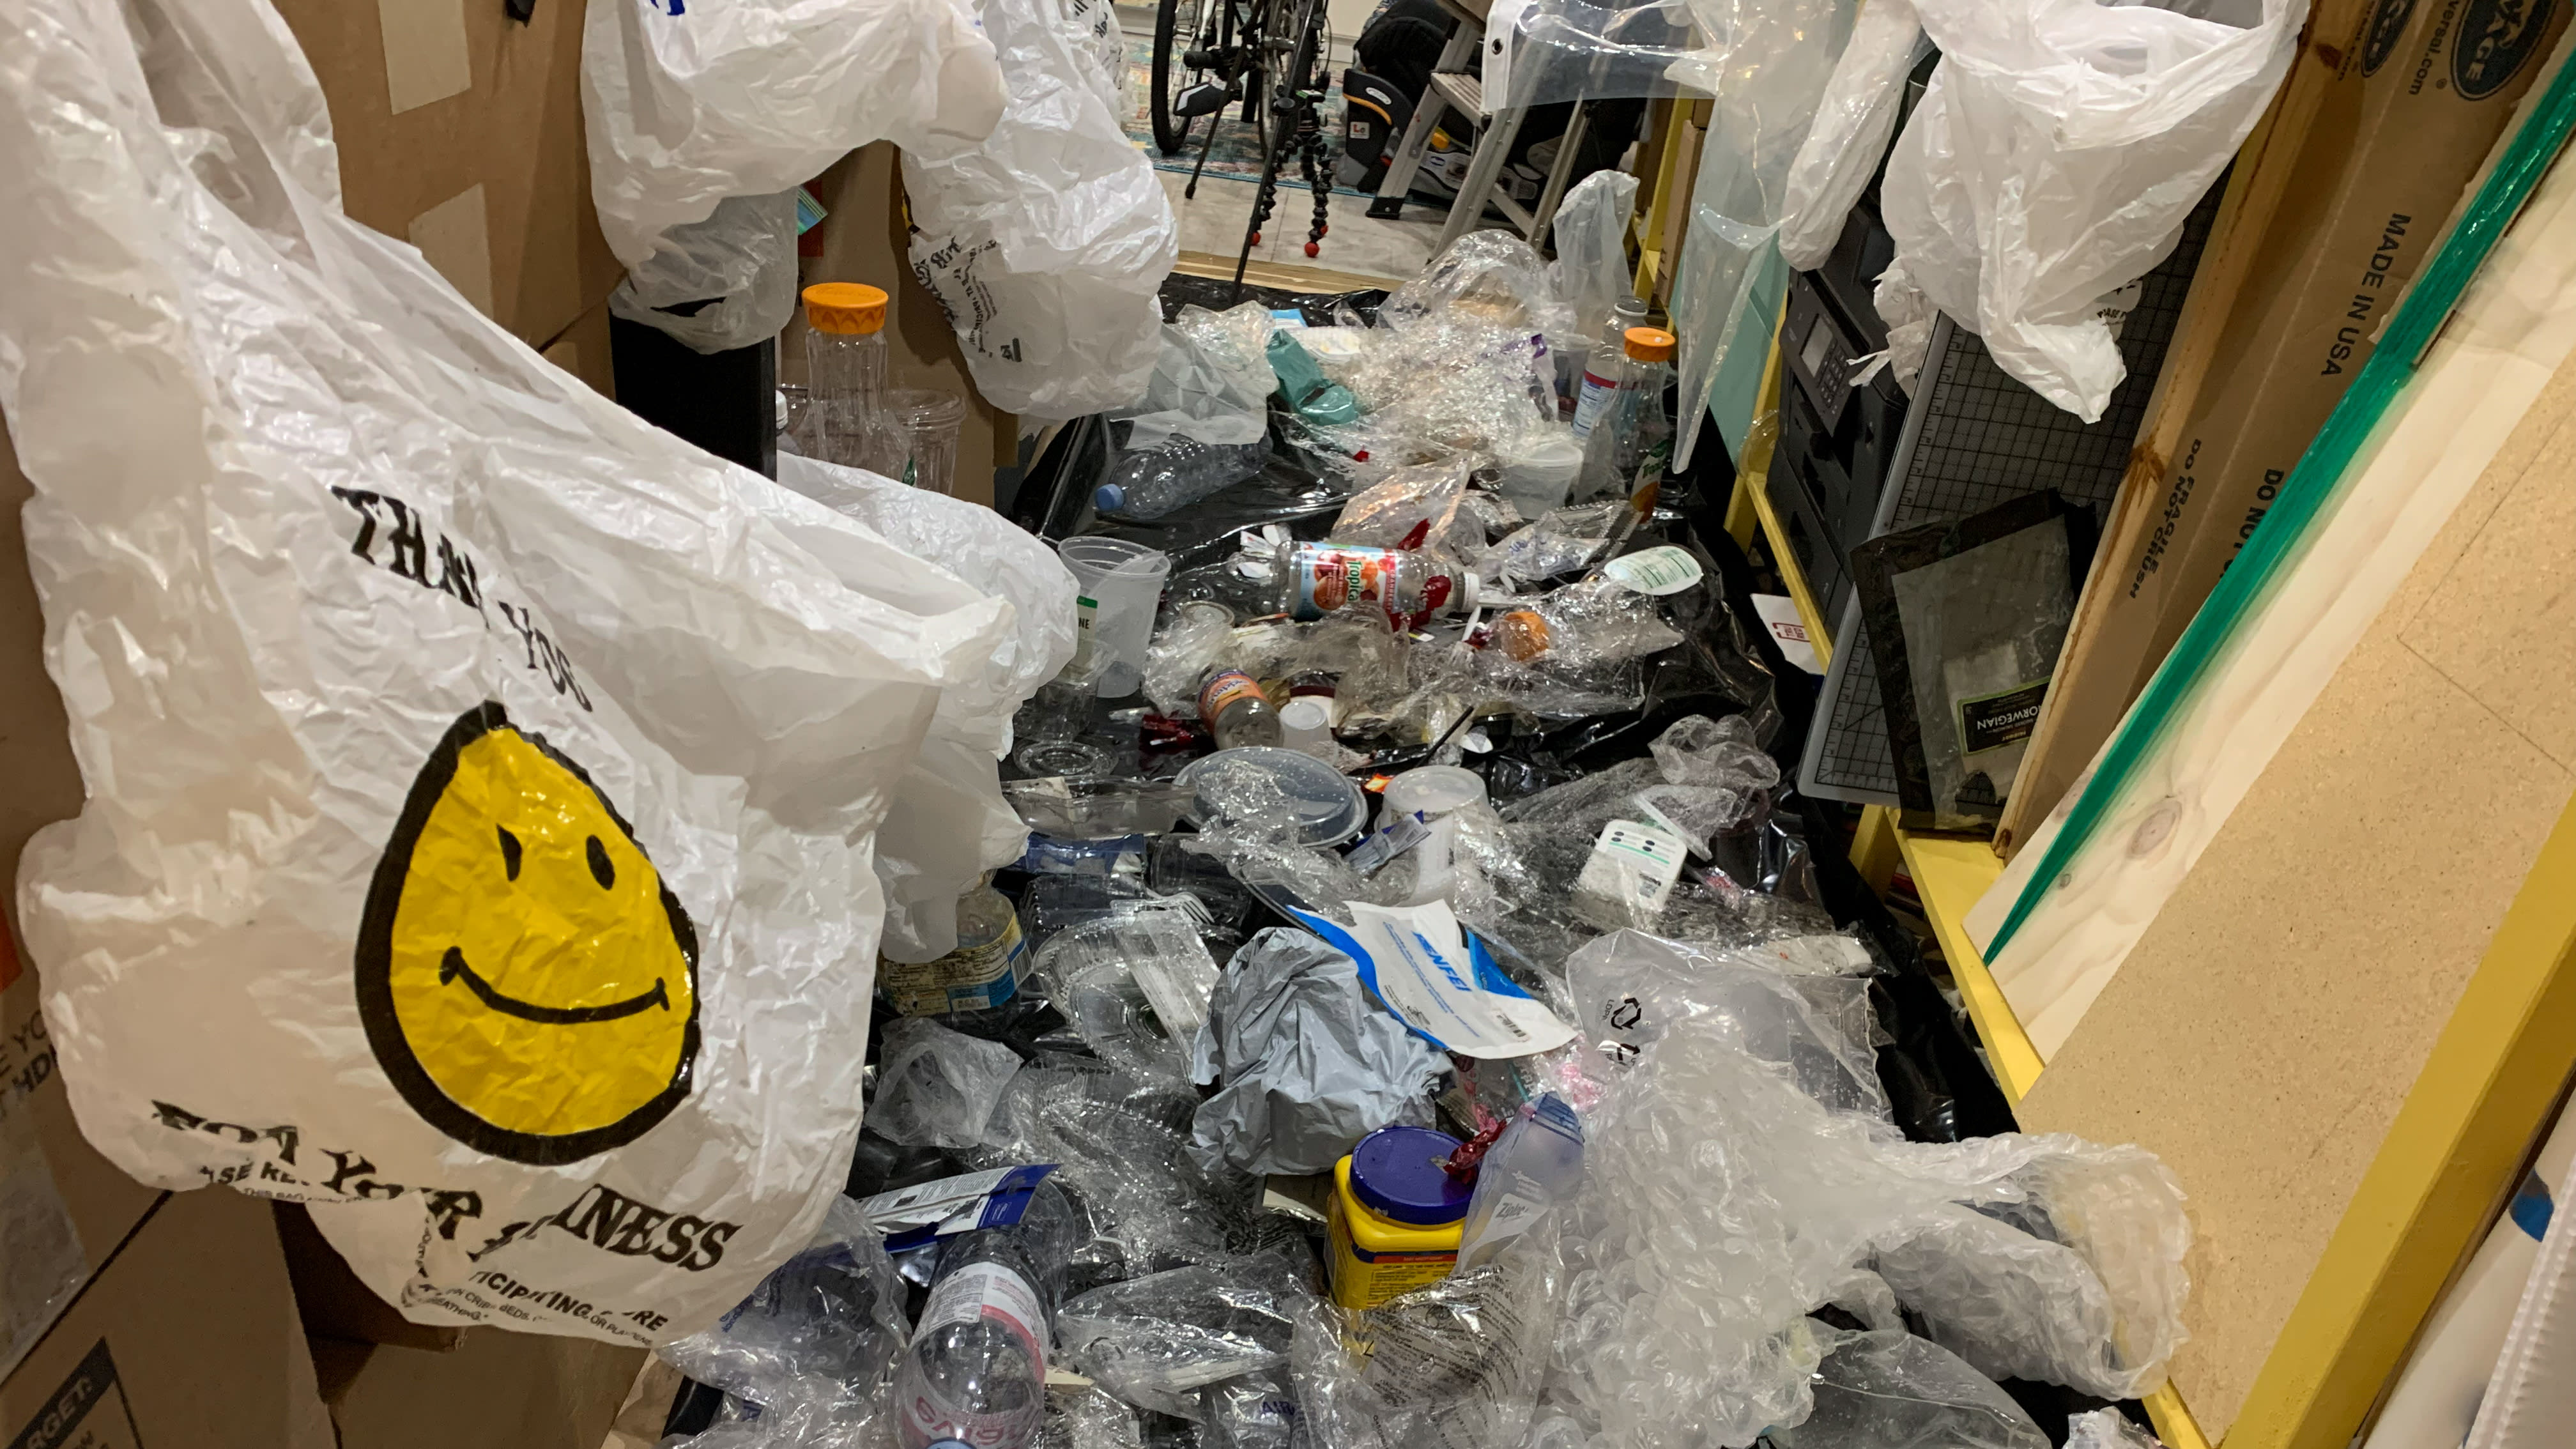 Photograph of the artist's studio. On the left of the frame is a close-up of a white plastic 'Thank You' shopping bag with a smiley face on it. The middle and right of the frame show hundreds of sundry single-use plastic items strewn about the floor.